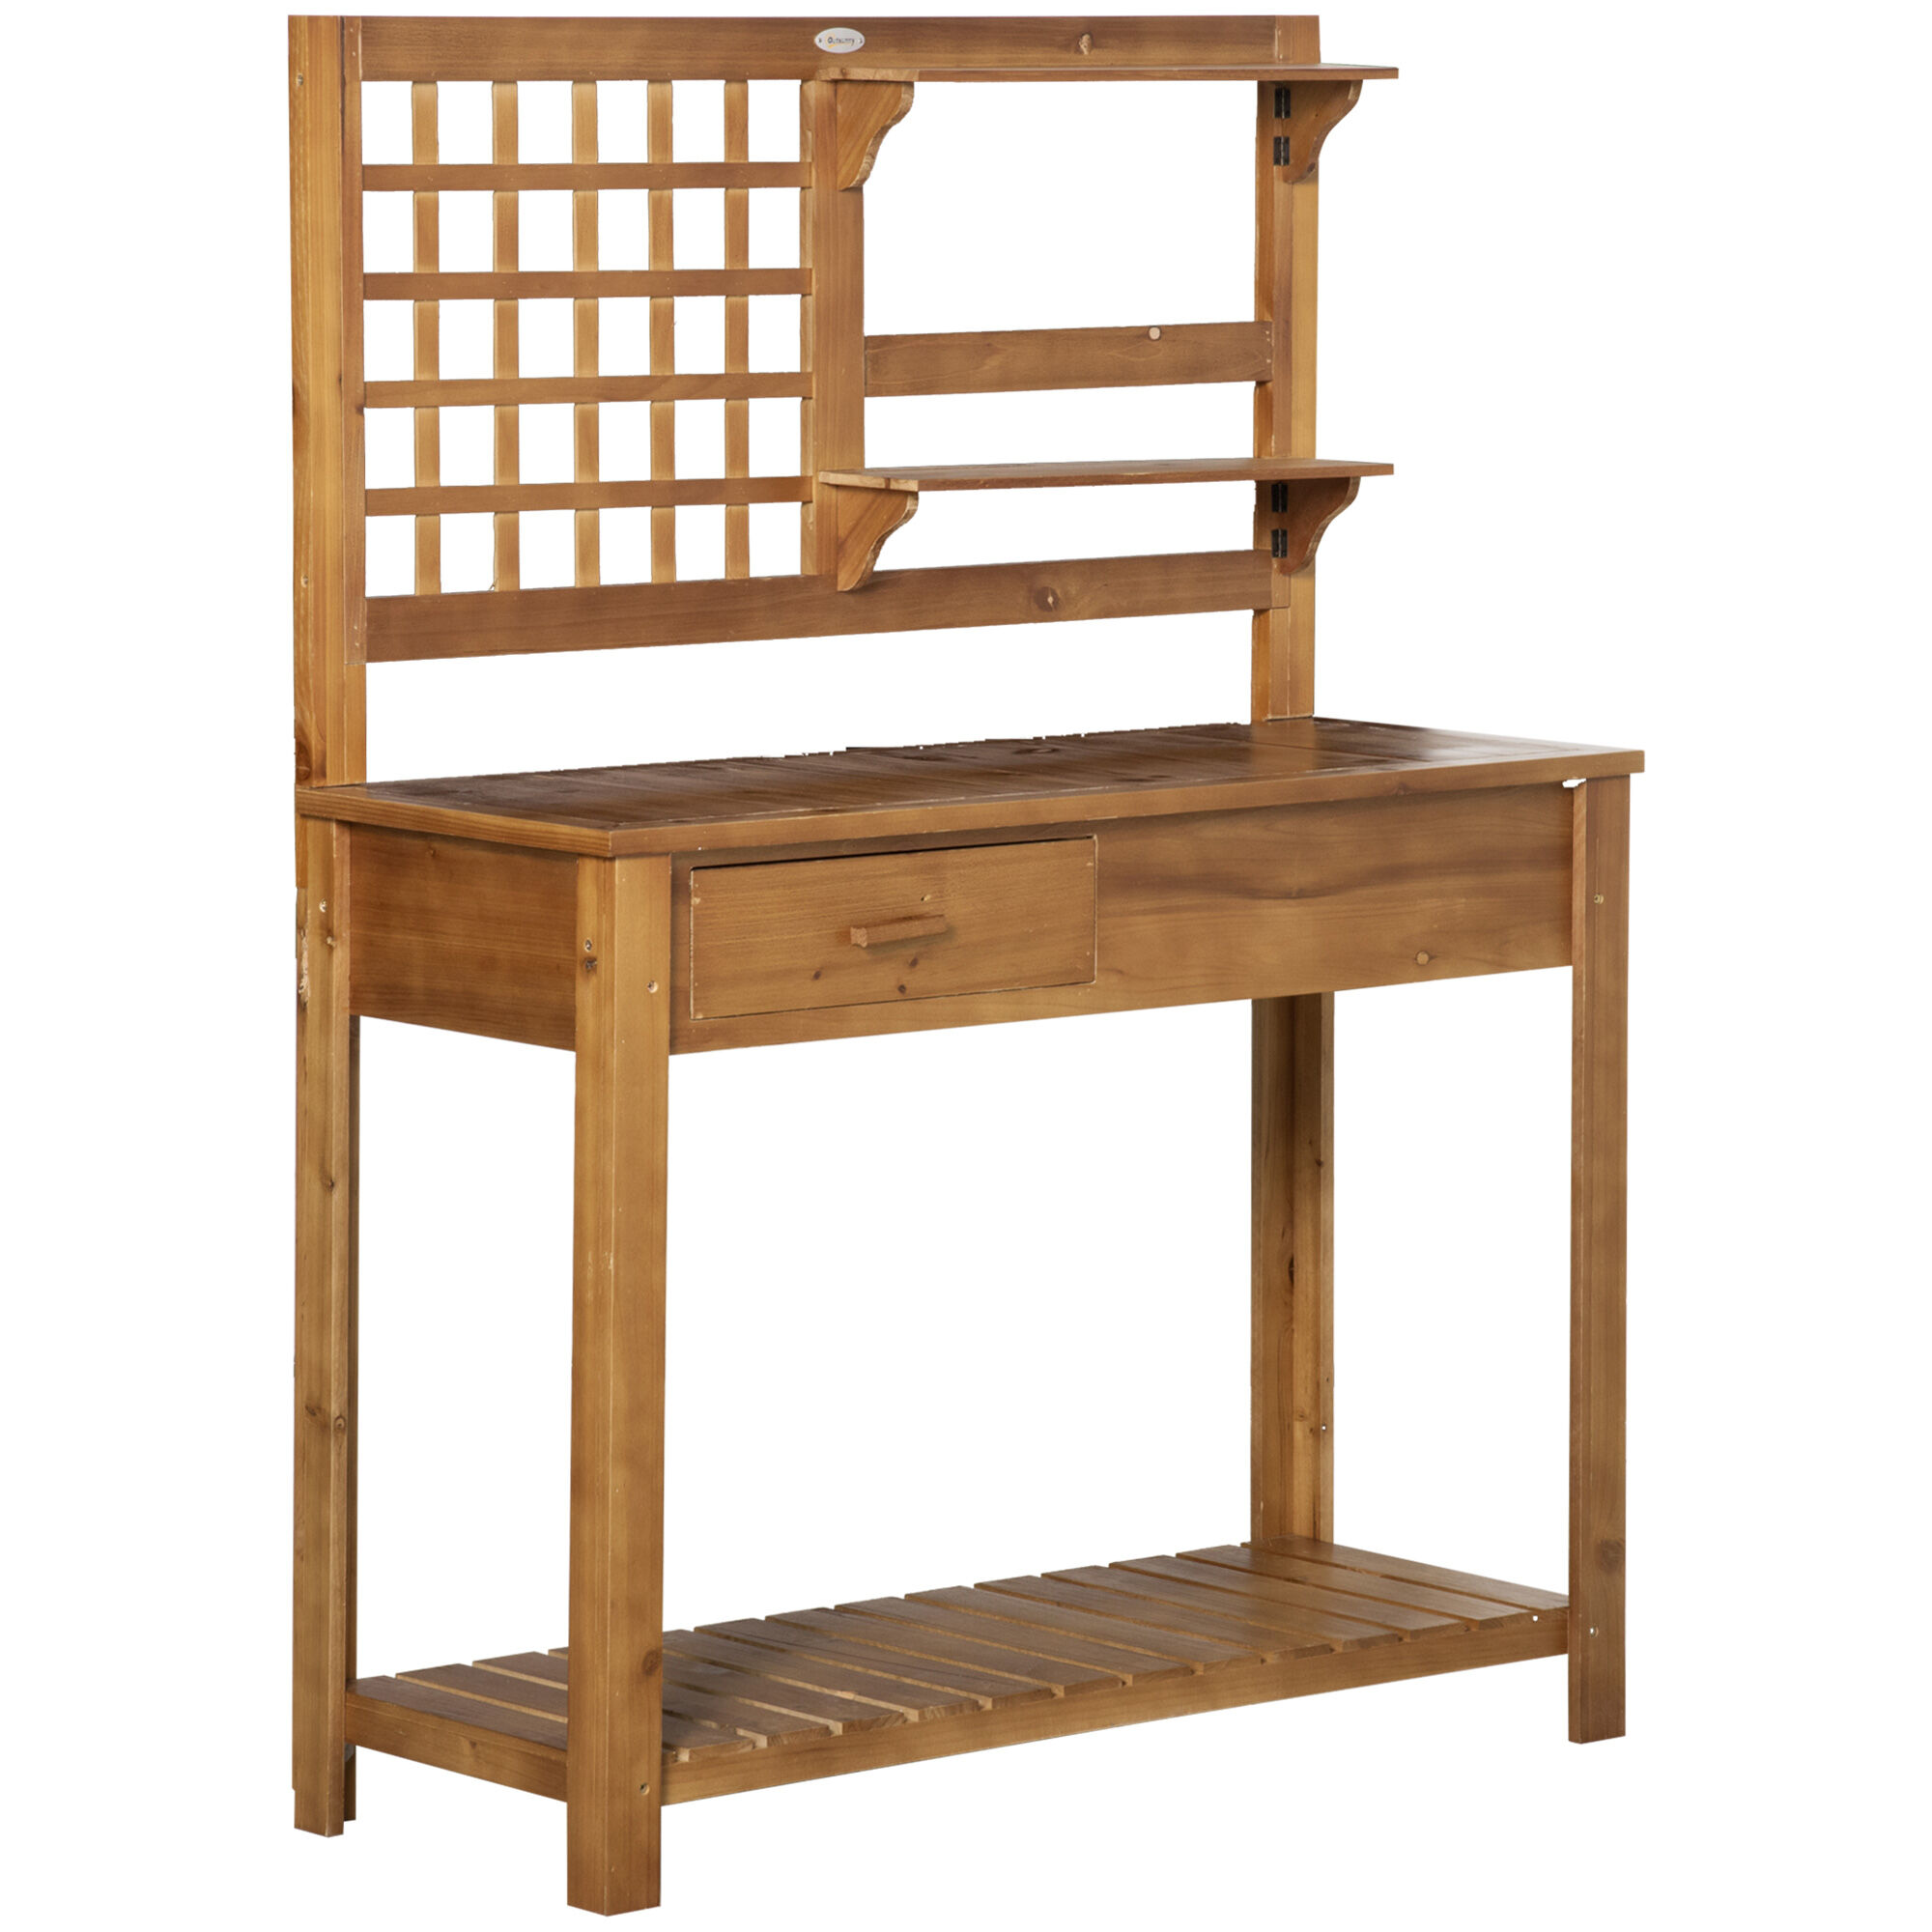 Outsunny Outdoor Wooden Potting Bench Table with Shelves Drawer Workstation Brown   Aosom.com